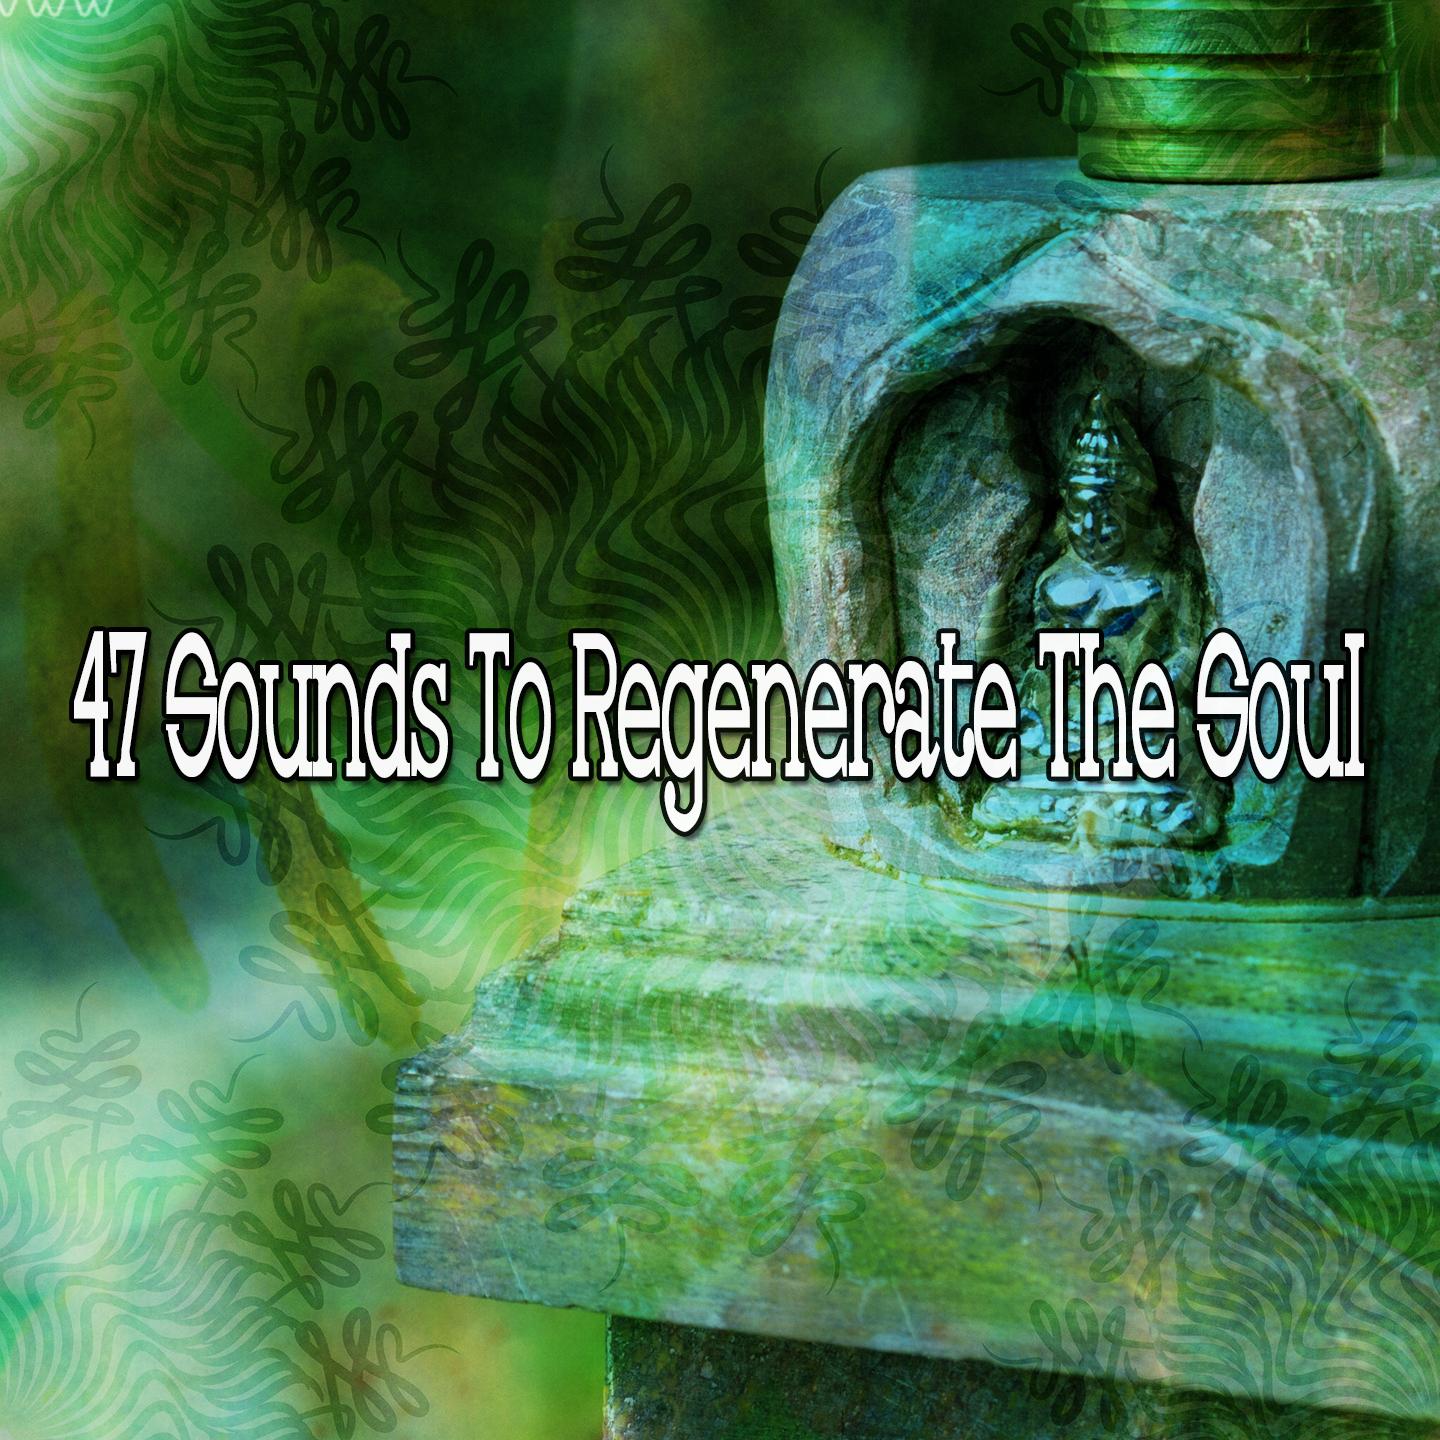 47 Sounds to Regenerate the Soul